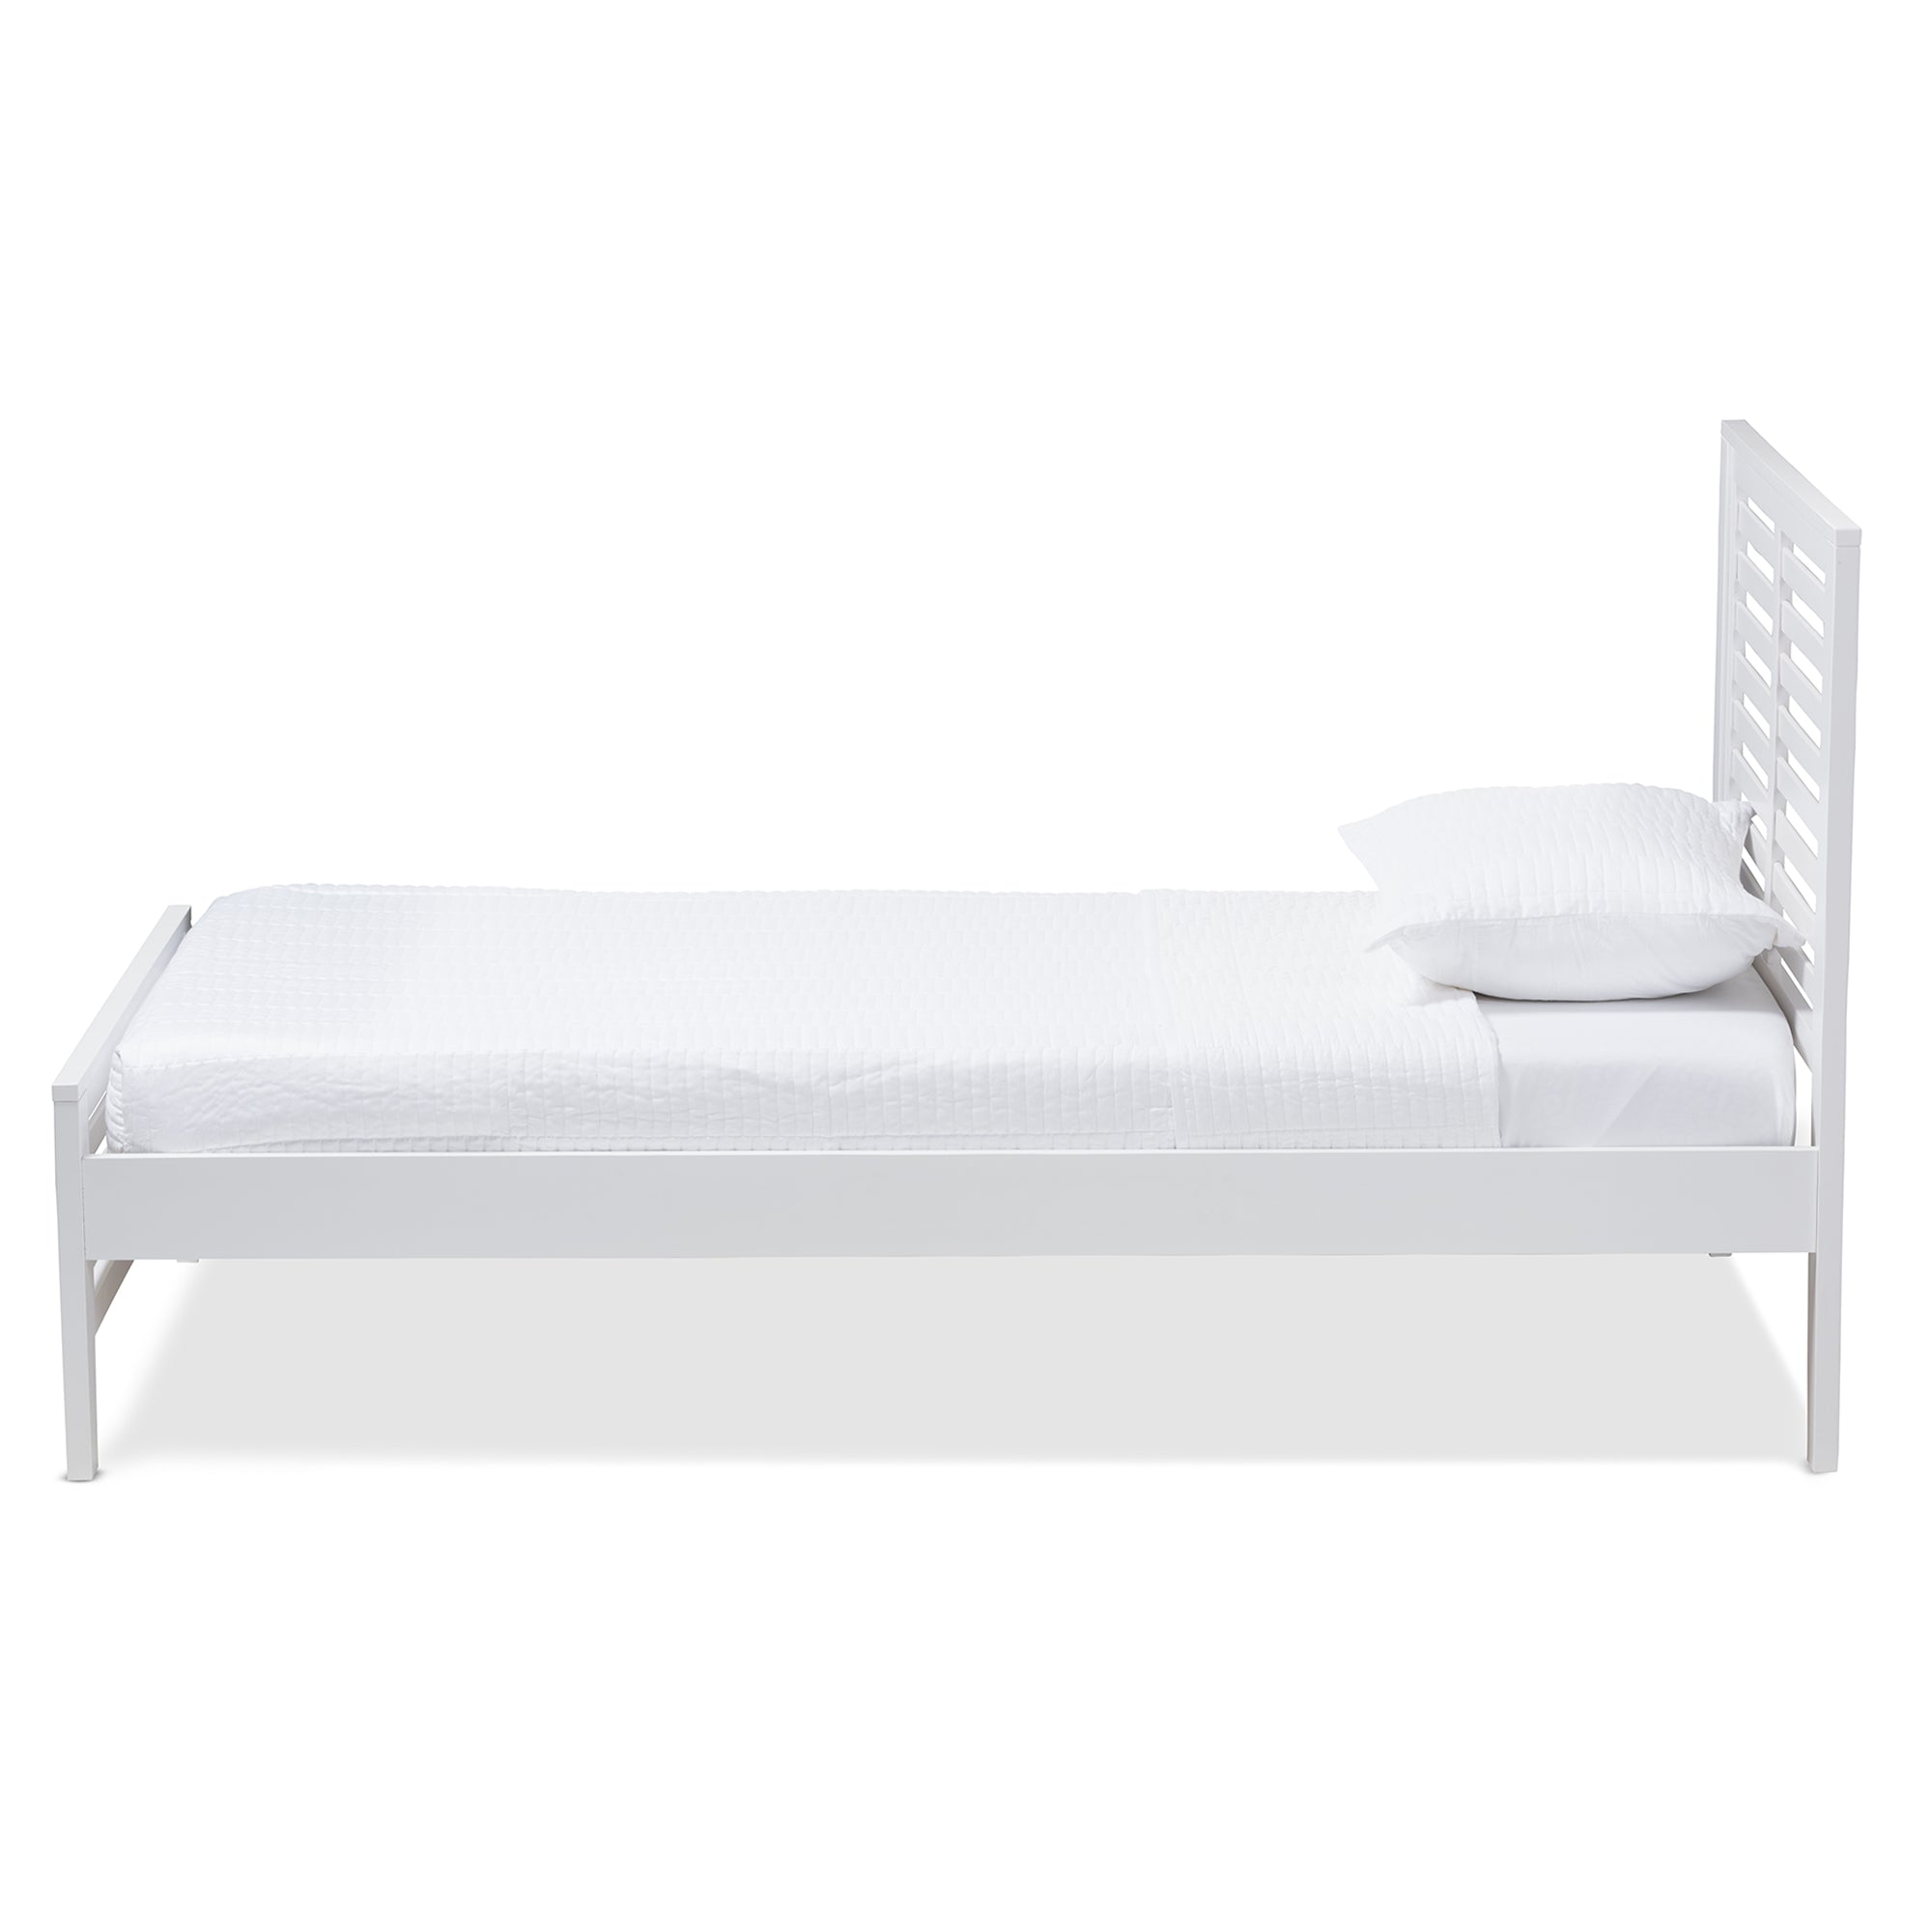 Sedona Mission Bed White-Finished-Bed-Baxton Studio - WI-Wall2Wall Furnishings